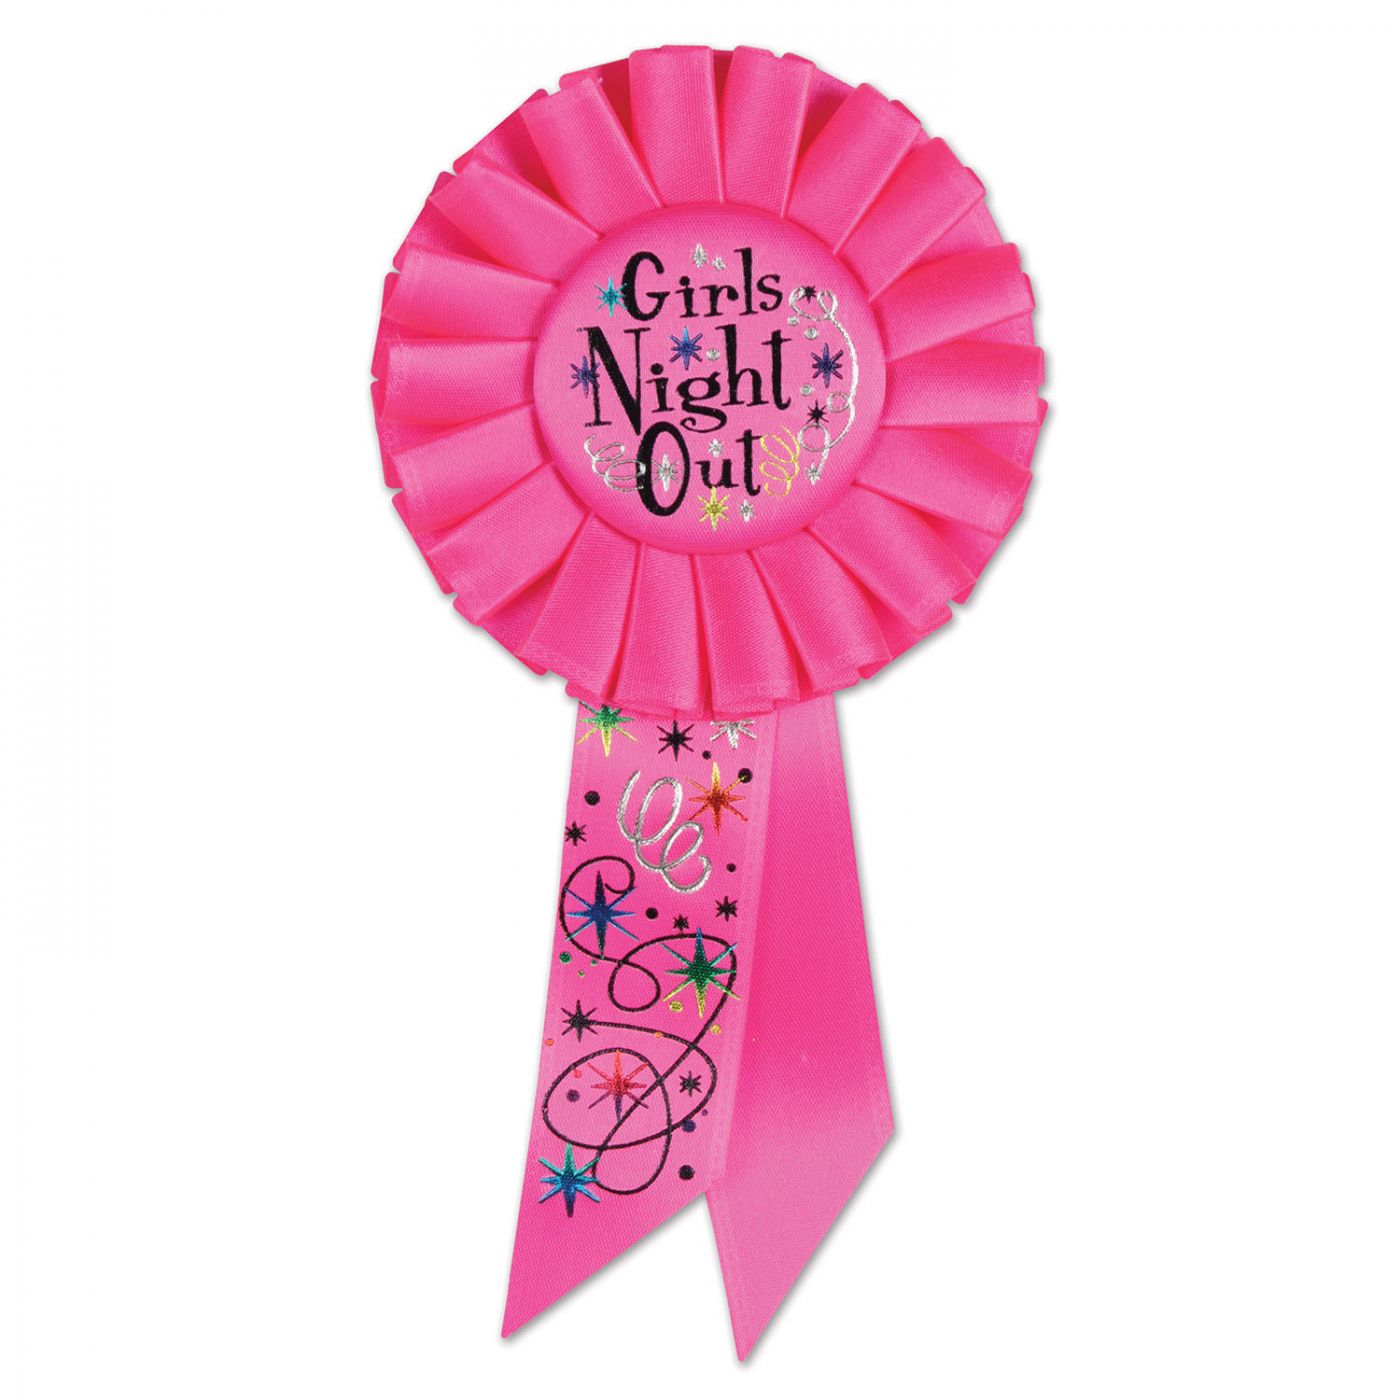 Girls' Night Out Rosette (6) image